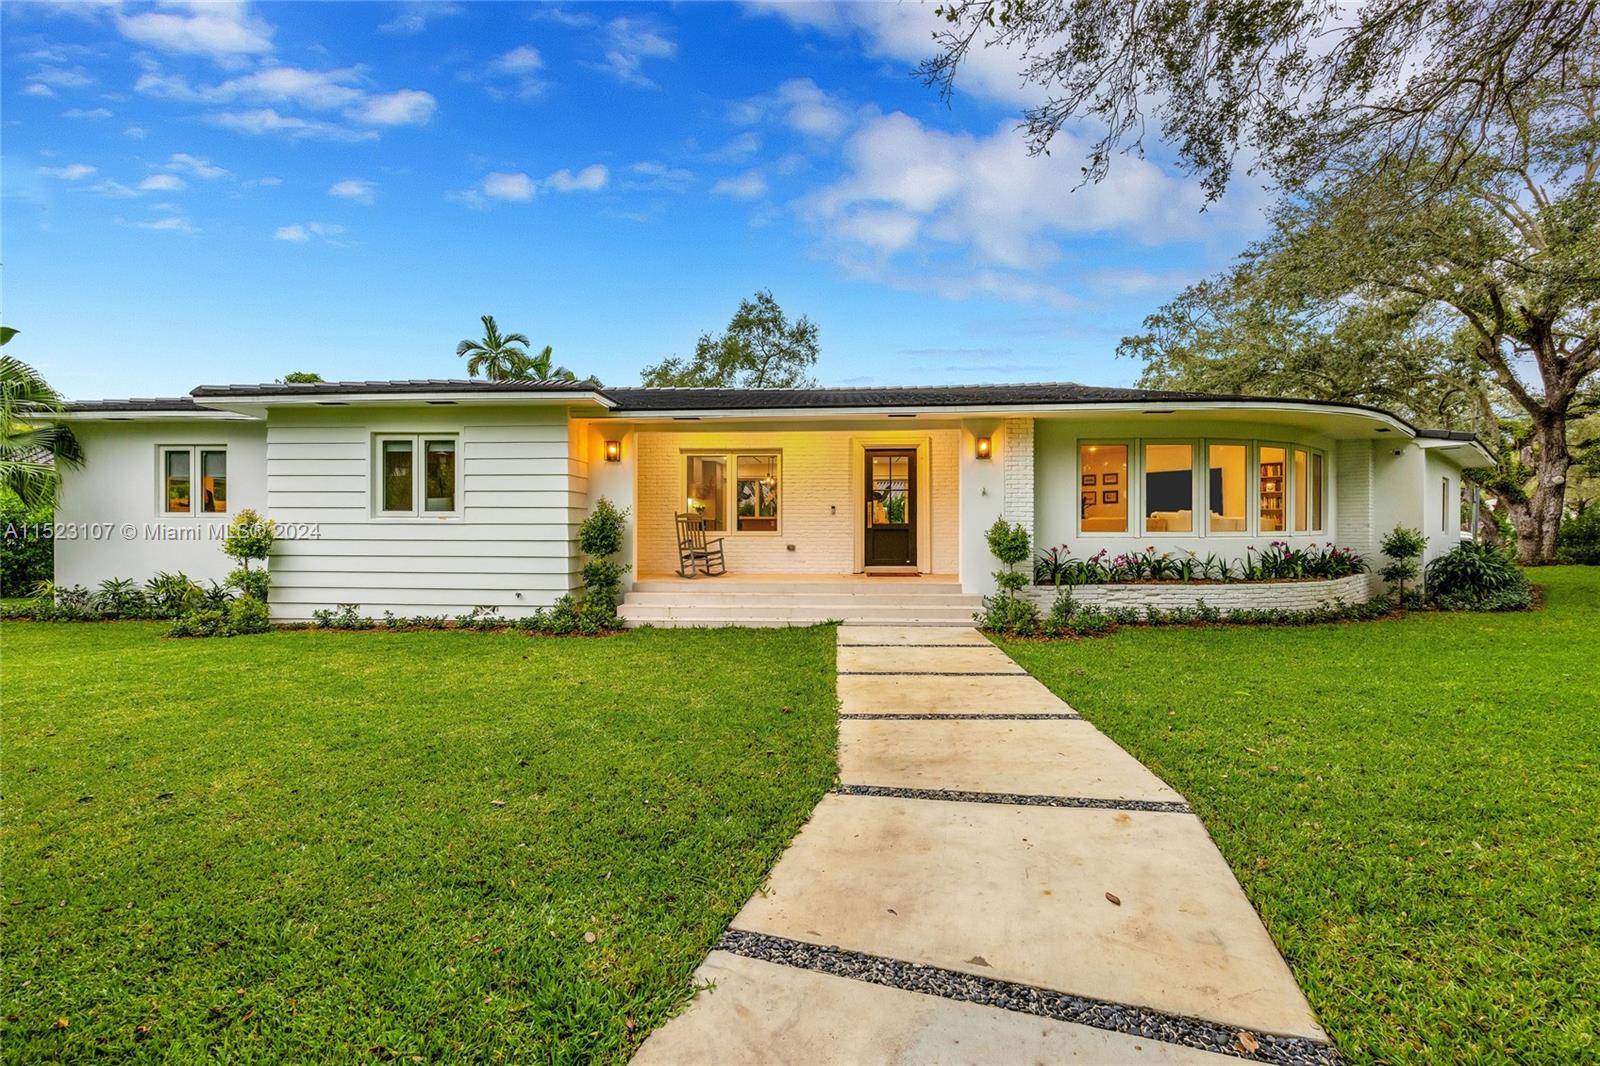 Nestled on a serene, tree lined street in the prestigious South Coral Gables area, this beautifully renovated residence spans 2, 717 square feet and is comprised of 4 bedrooms, 3.